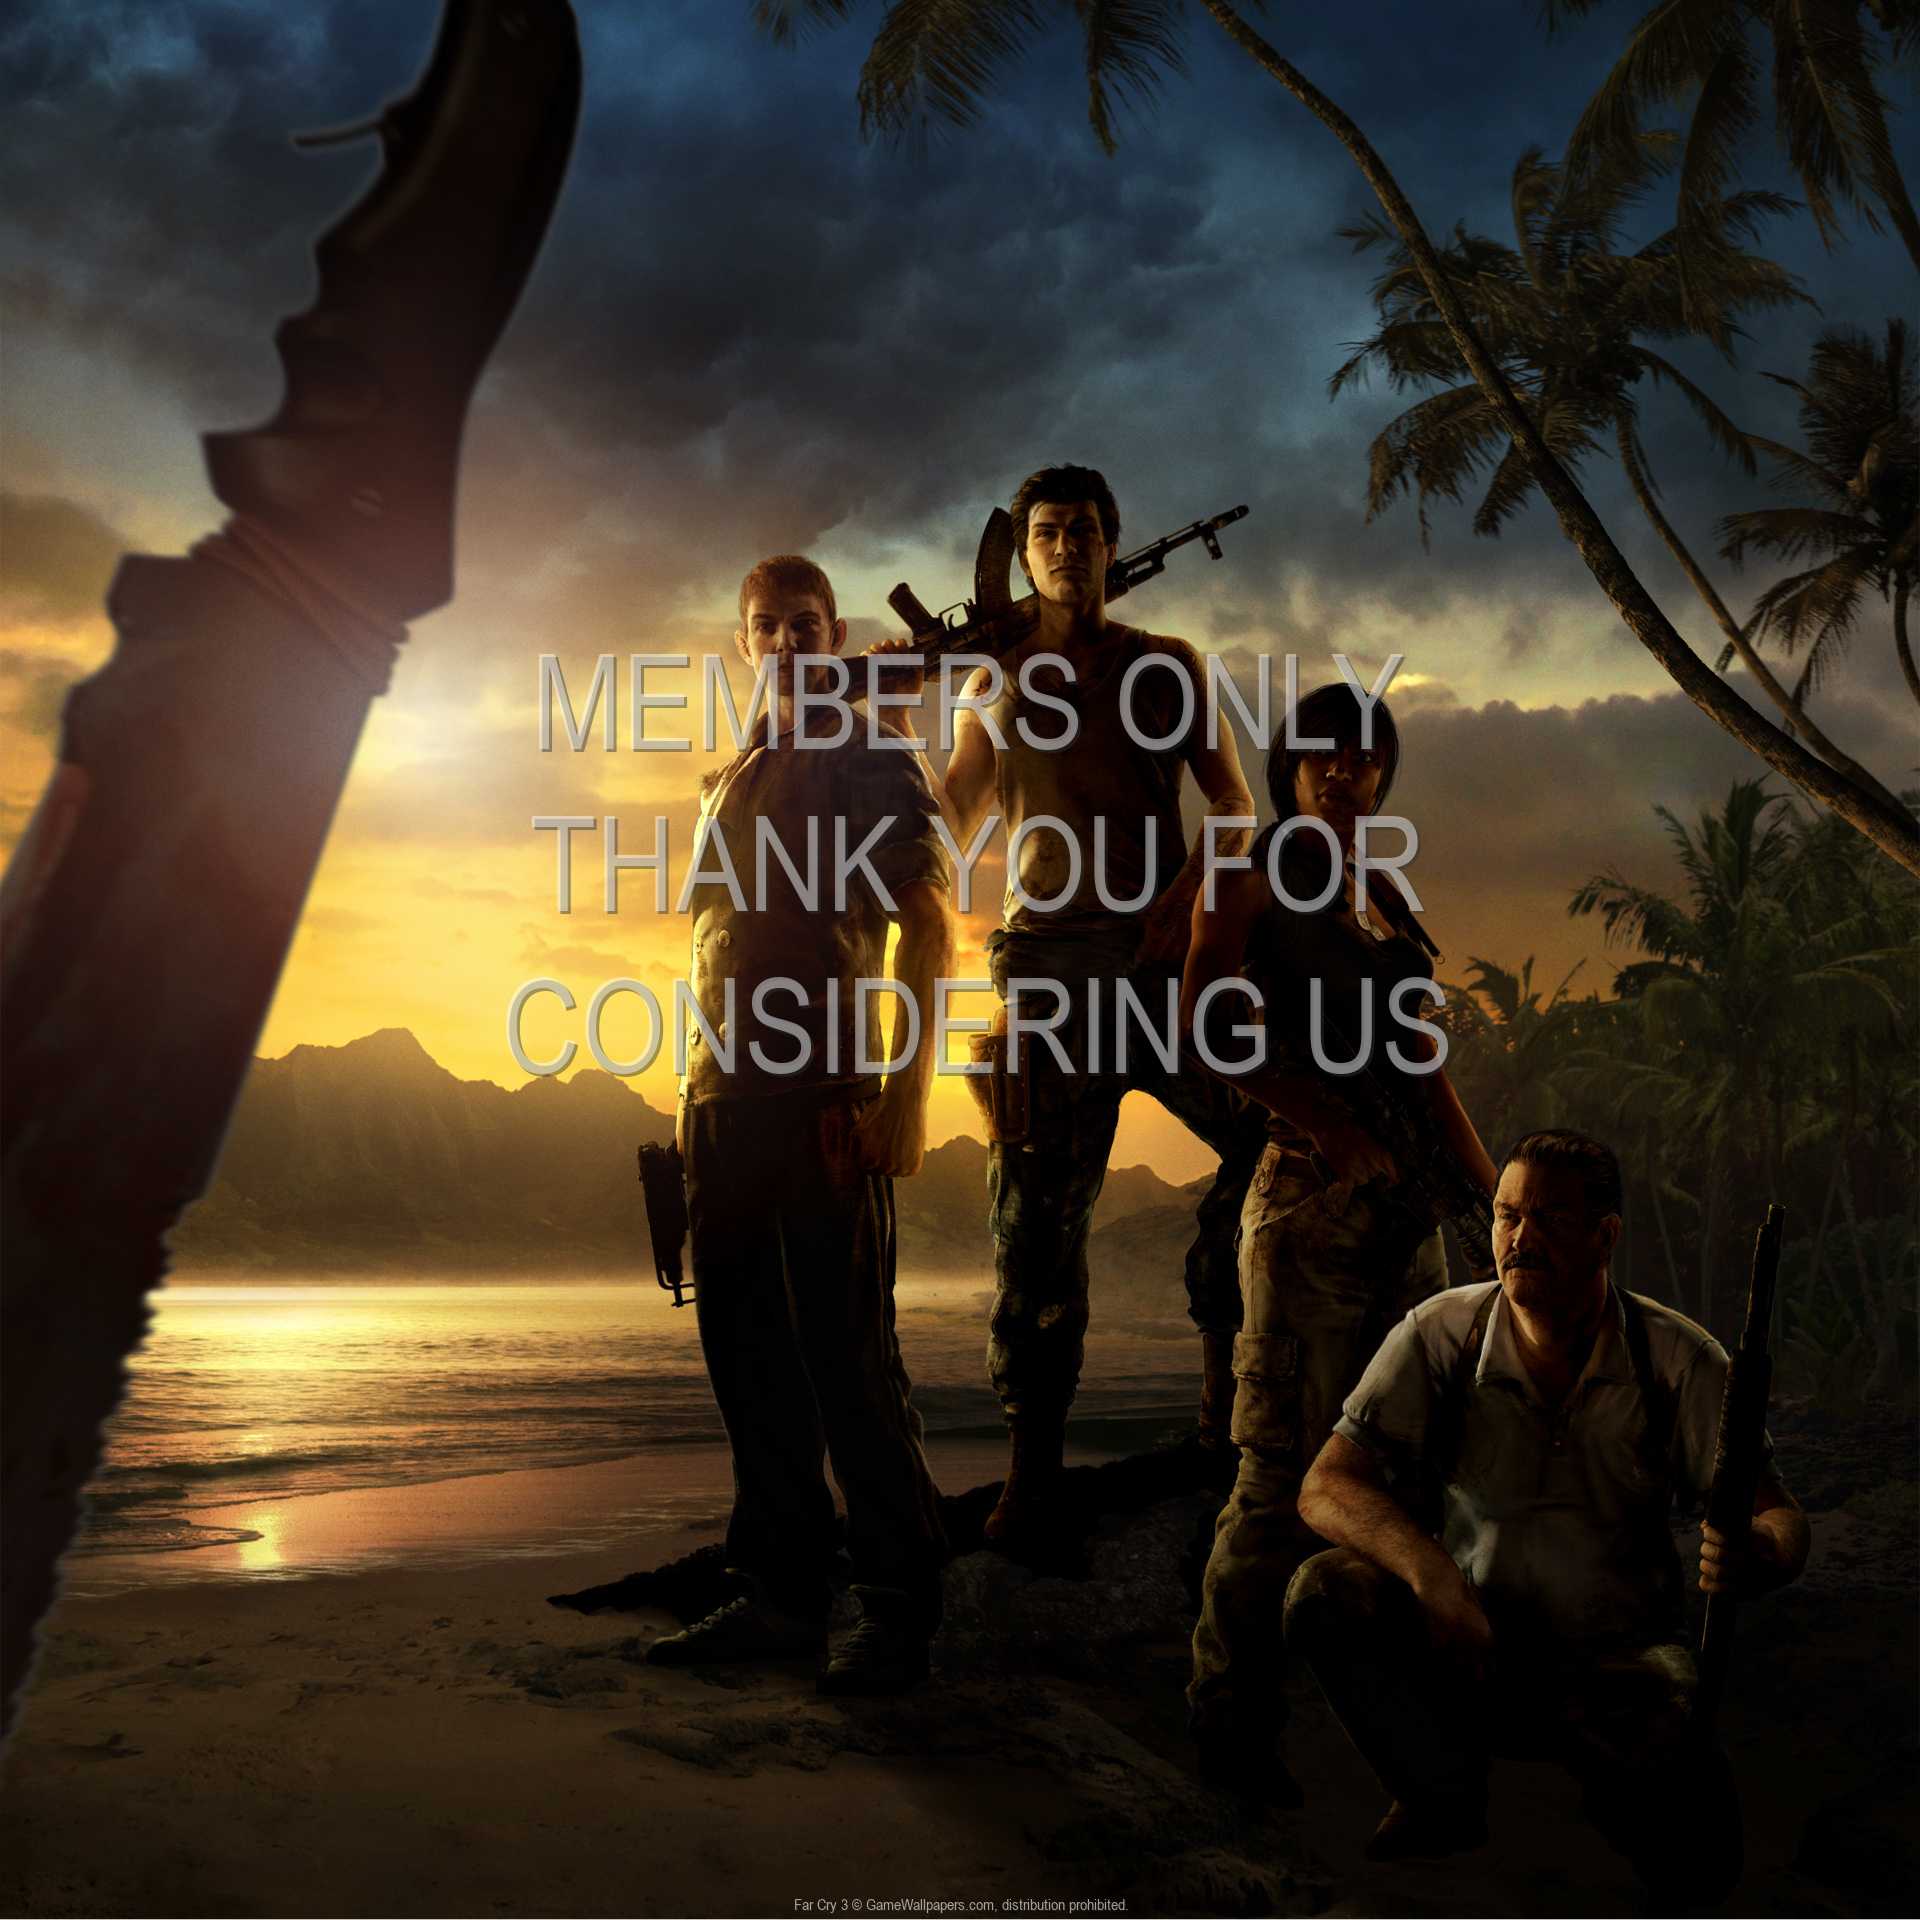 Far Cry 3 1080p Horizontal Mobile wallpaper or background 07